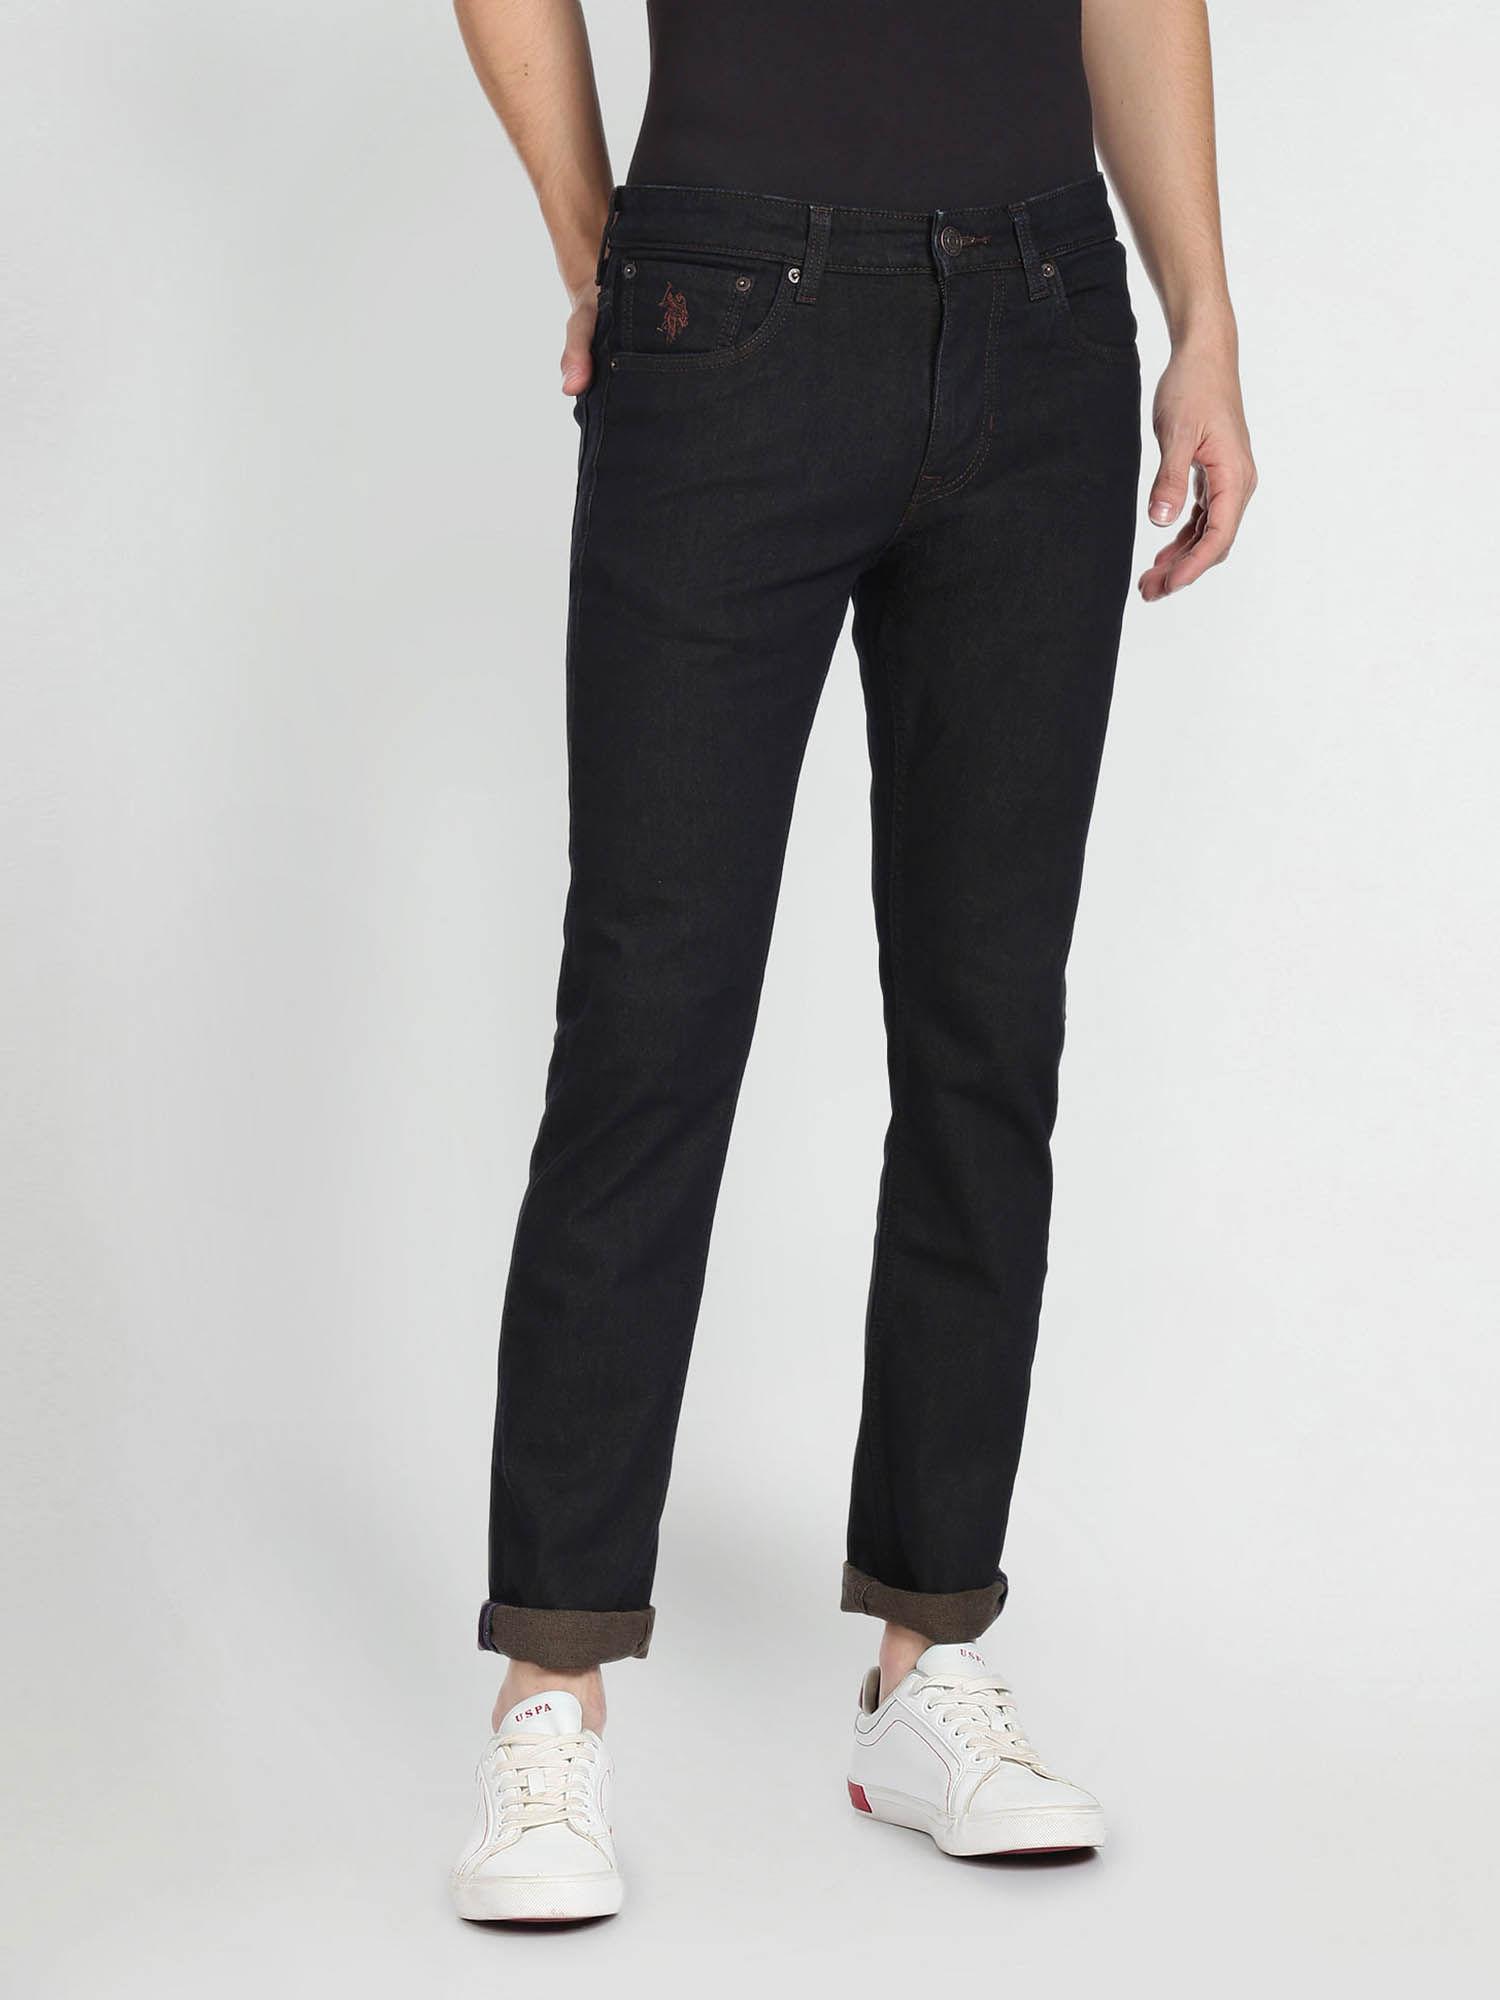 Rinsed Regallo Skinny Fit Jeans